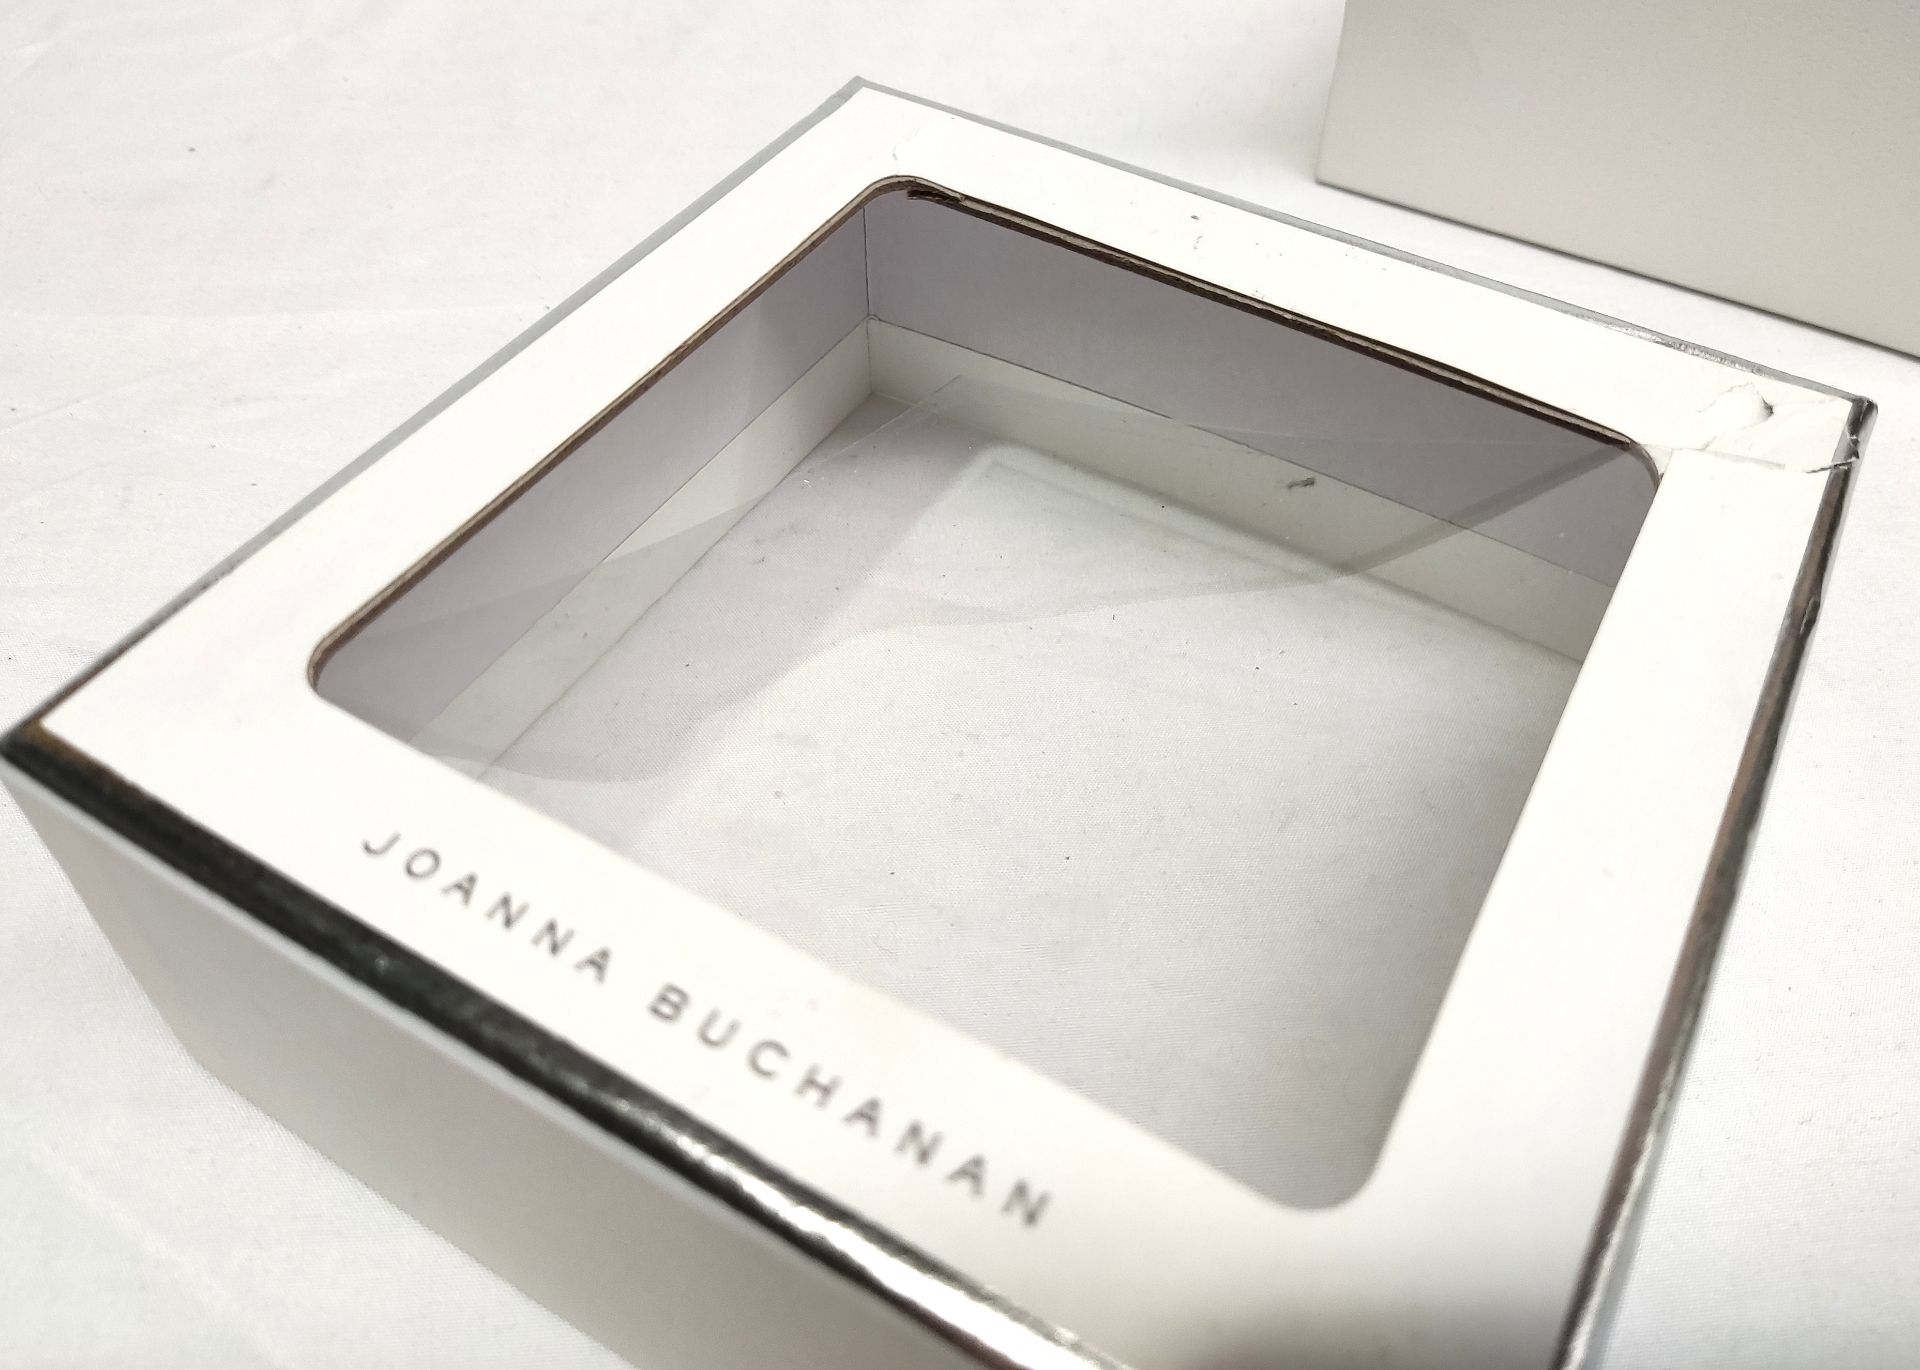 1 x JOANNA BUCHANAN Knot Placecard Holders - Set Of 8 - New/Boxed - Original RRP £168 - Ref: - Image 3 of 19